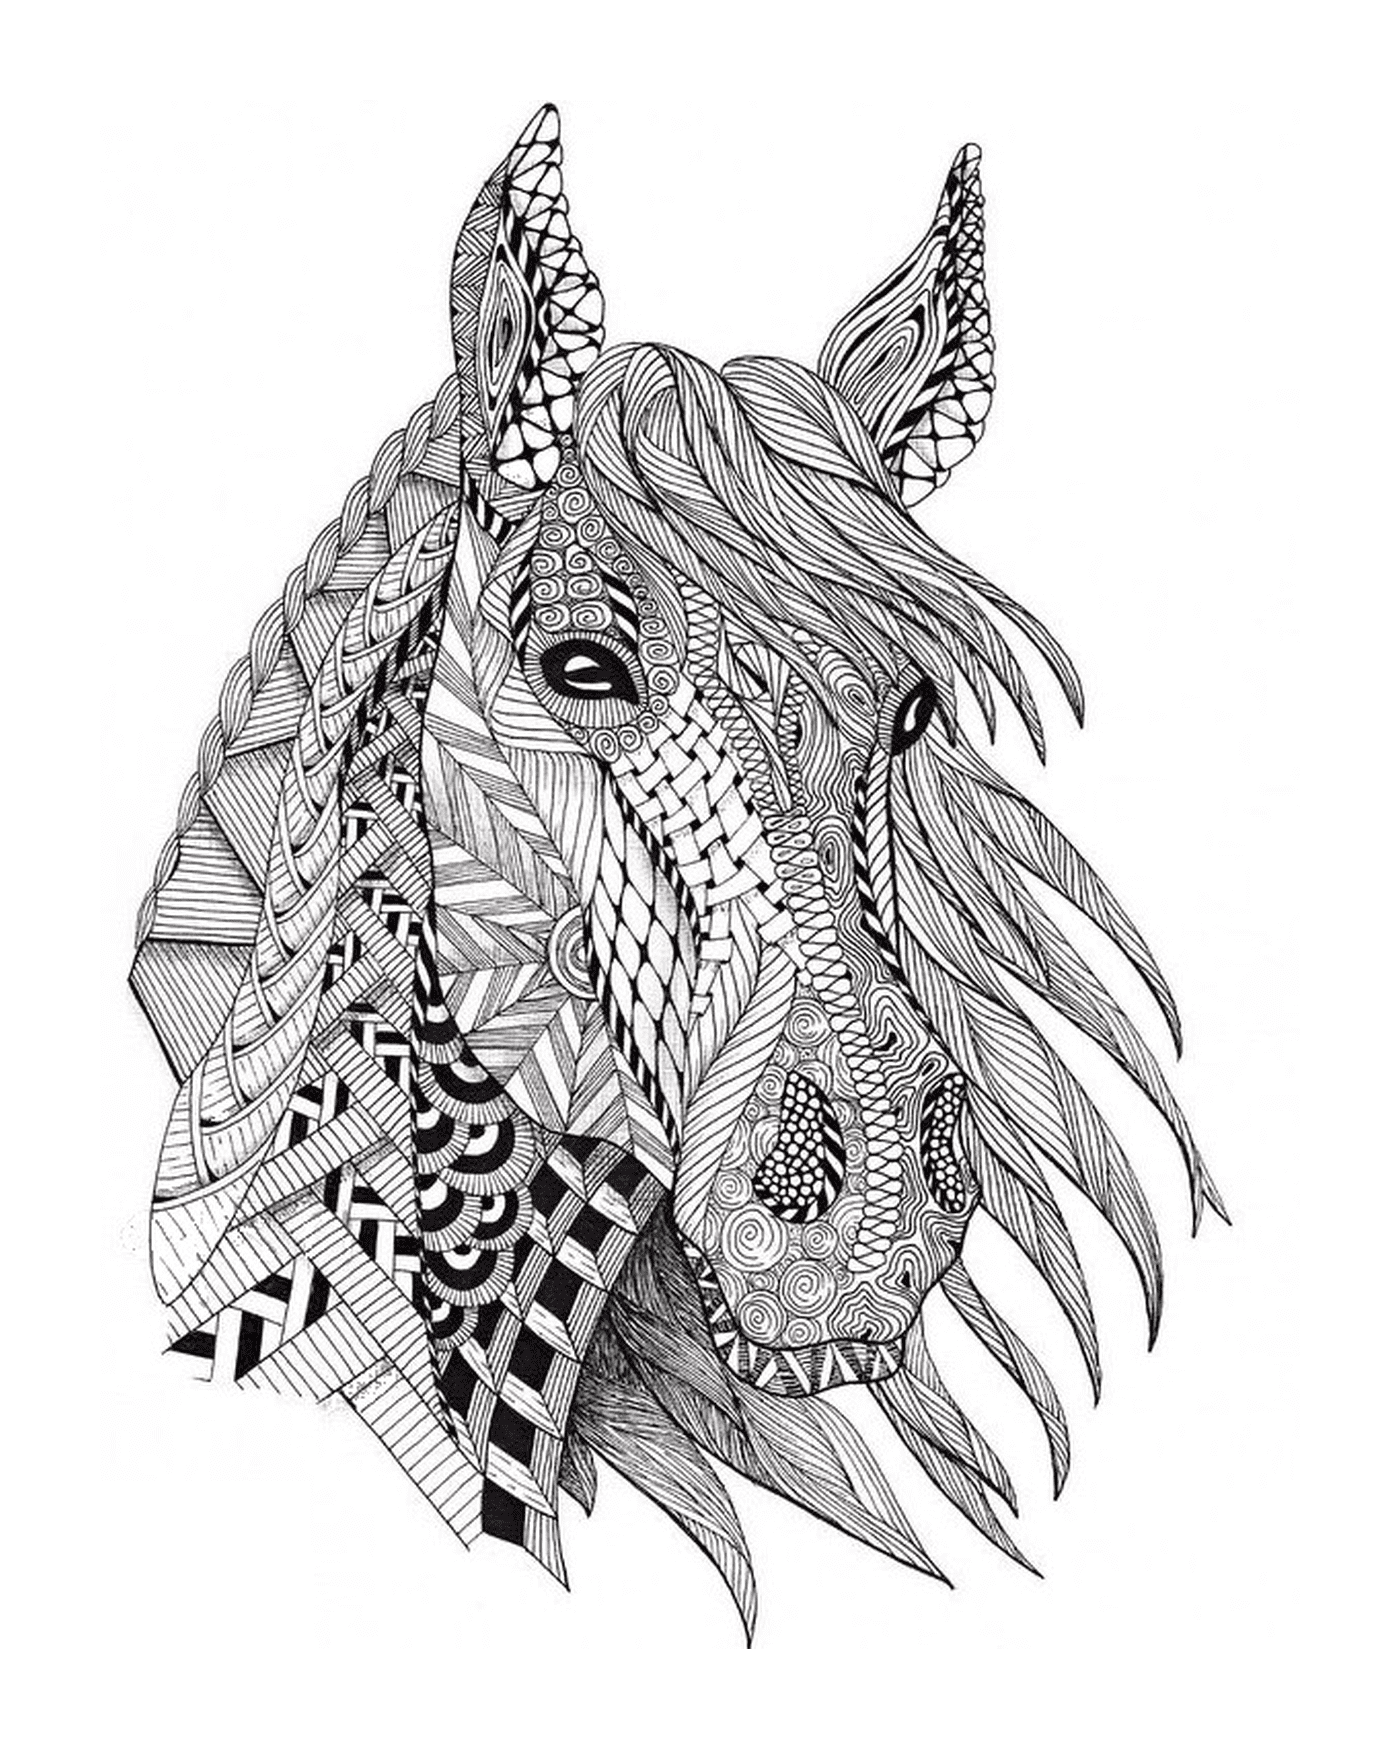  The head of a horse with several patterns 